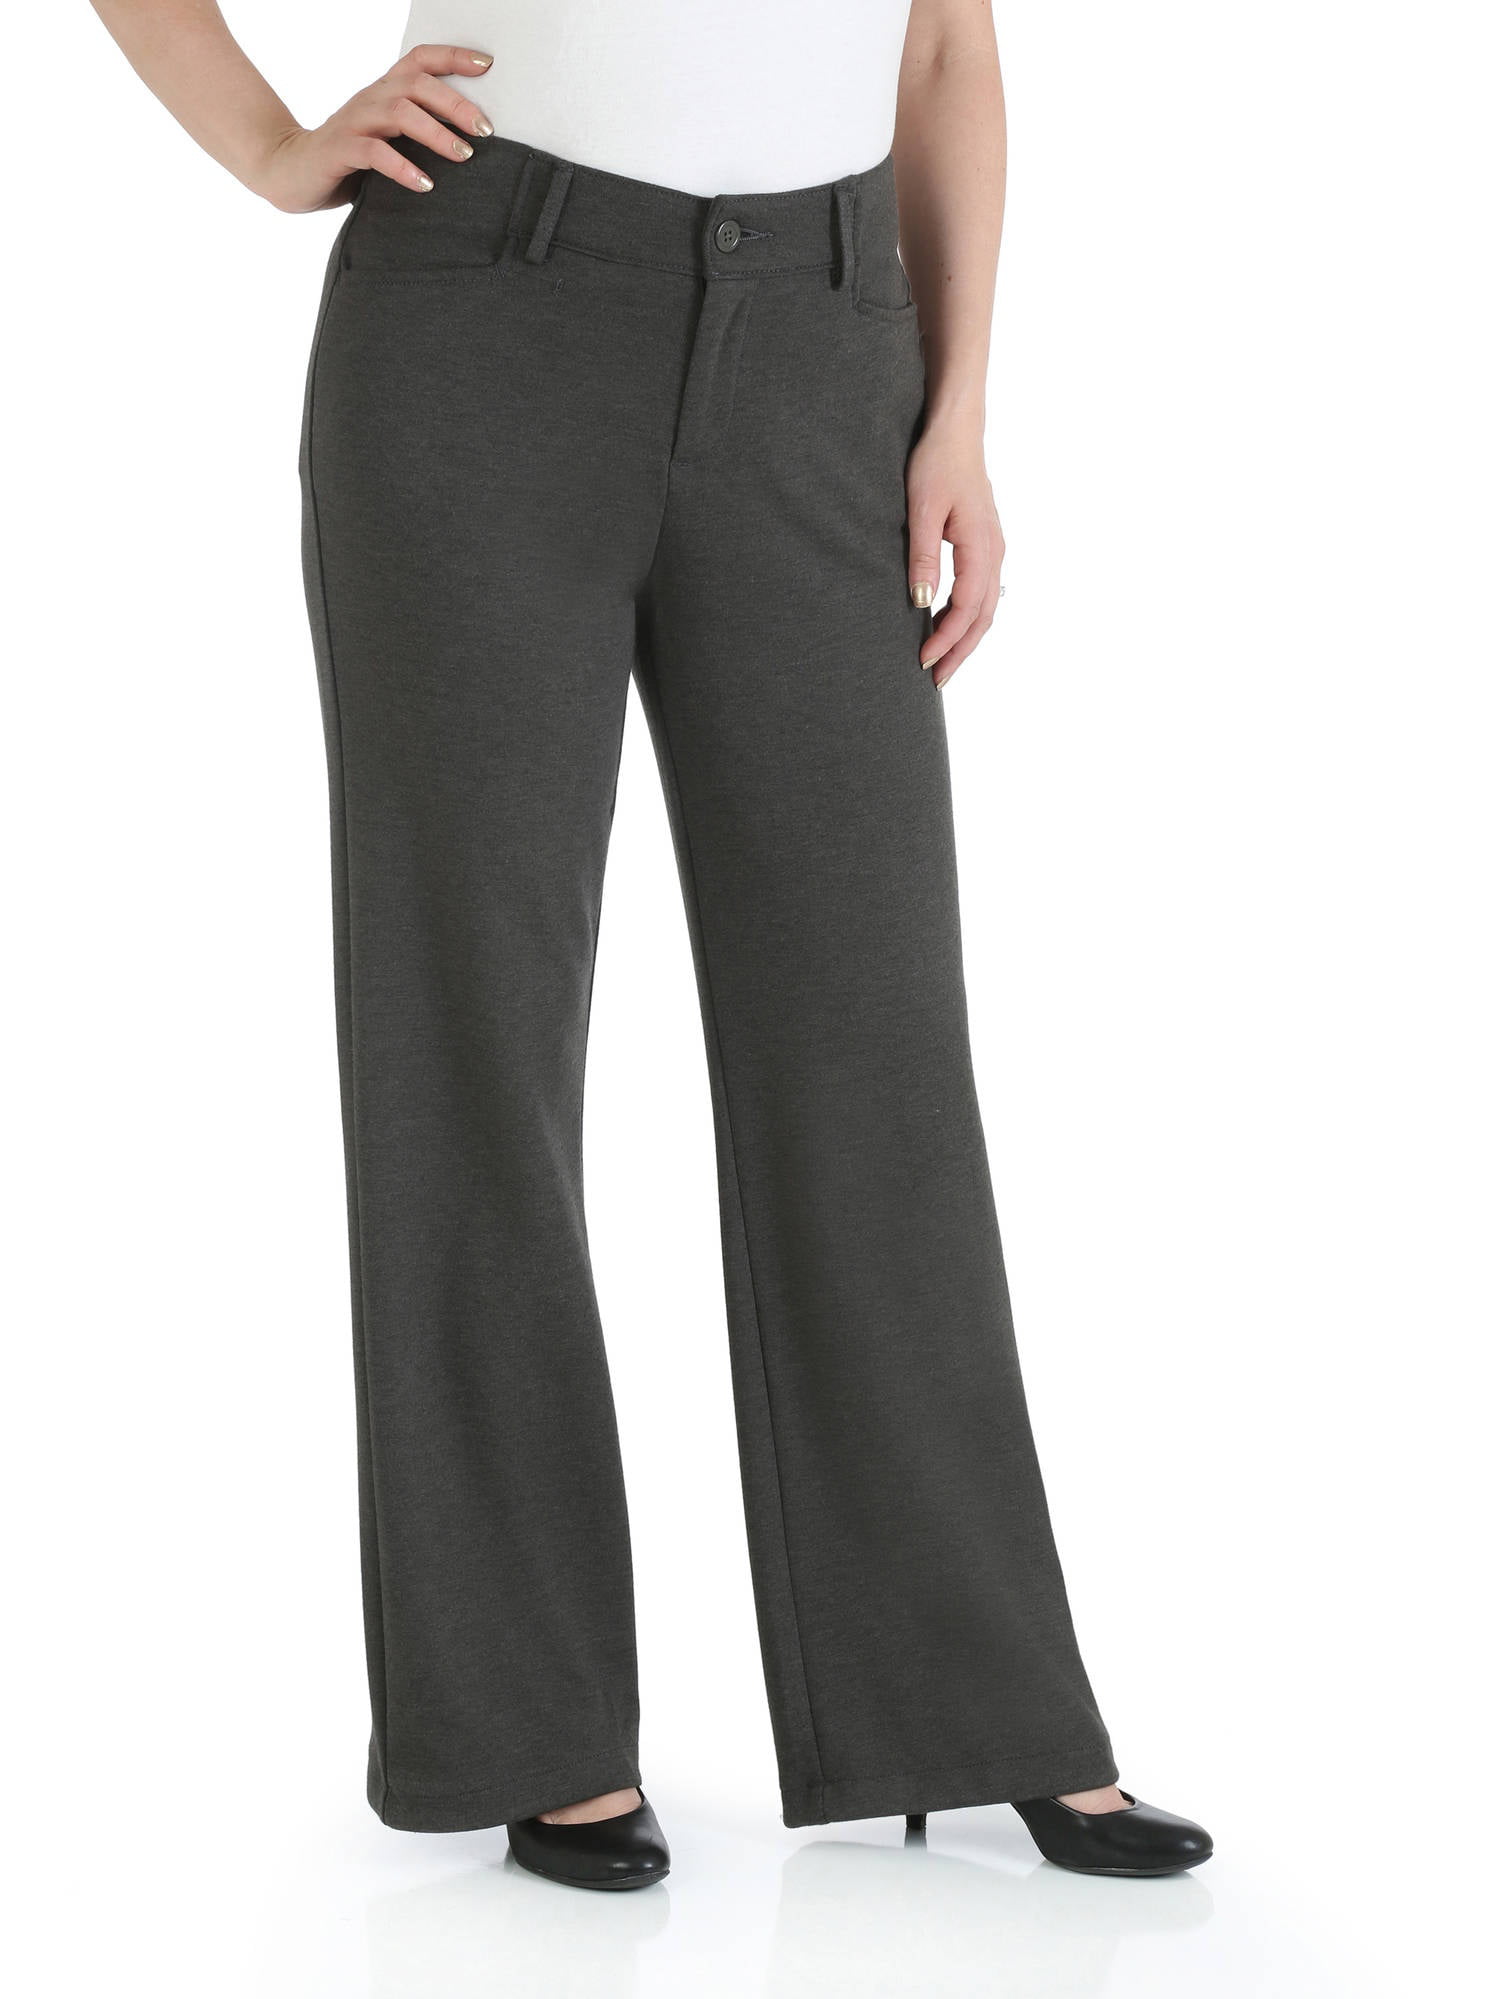 The Riders By Lee Women's Knit Pants Available in Regular, Petite, and ...